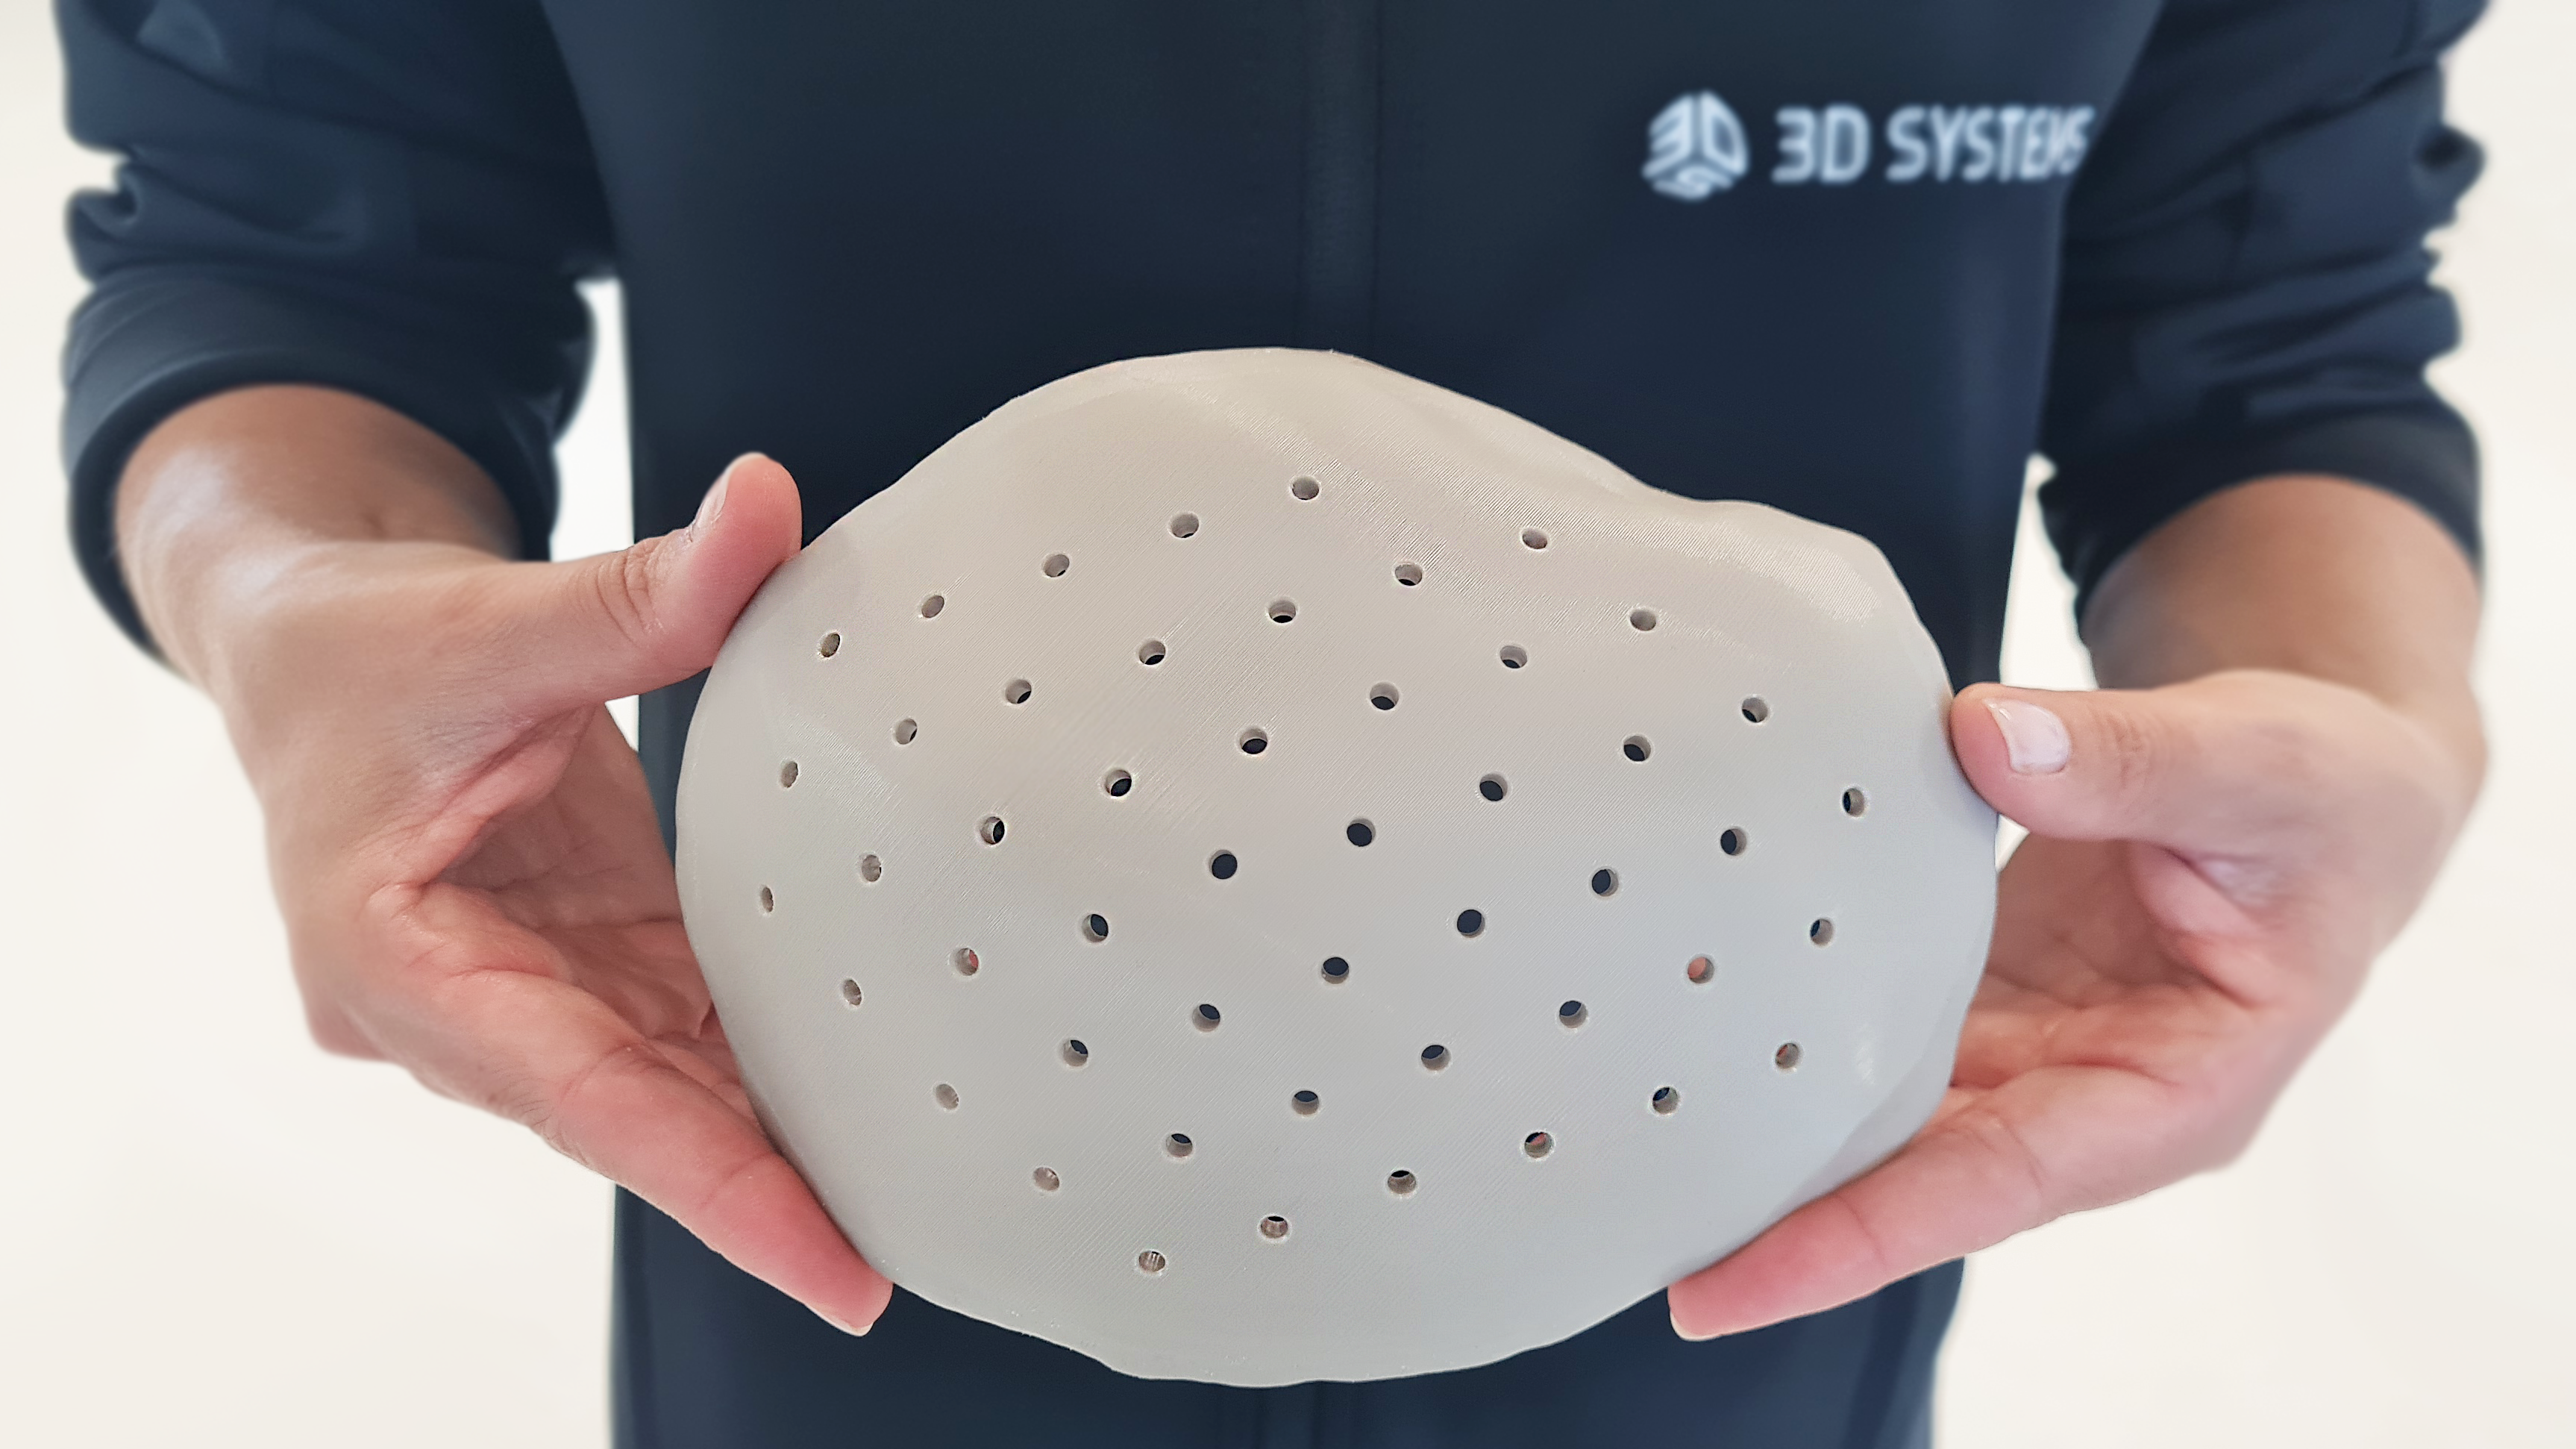 The VSP PEEK Cranial Implant is the first FDA-cleared, additively manufactured PEEK implant intended for cranioplasty procedures to restore defects in the skull.